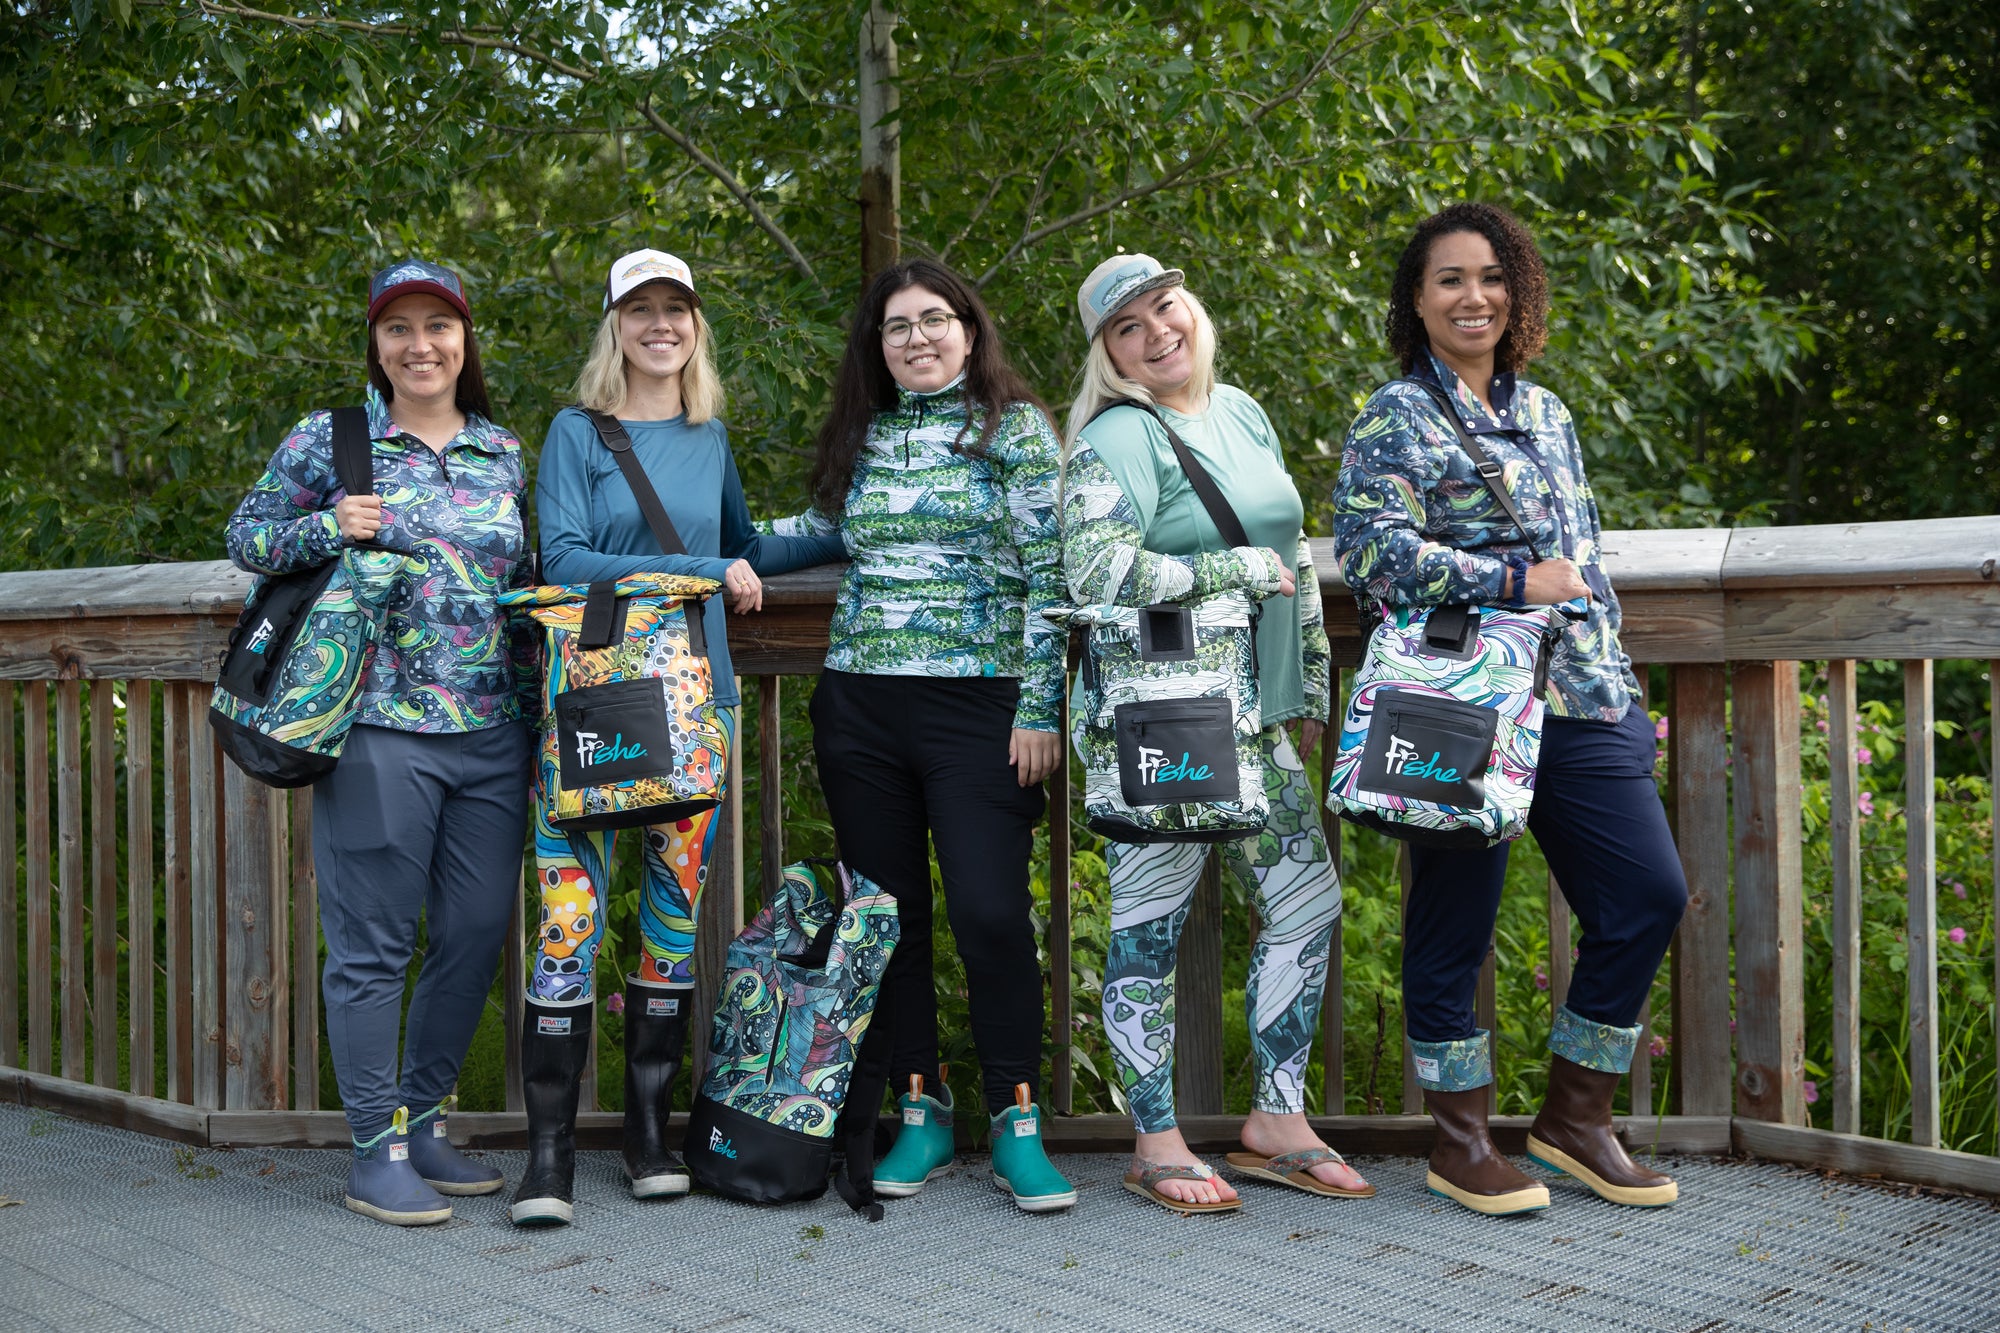 Bags Collection Image featuring multiple different bag options for the women angler